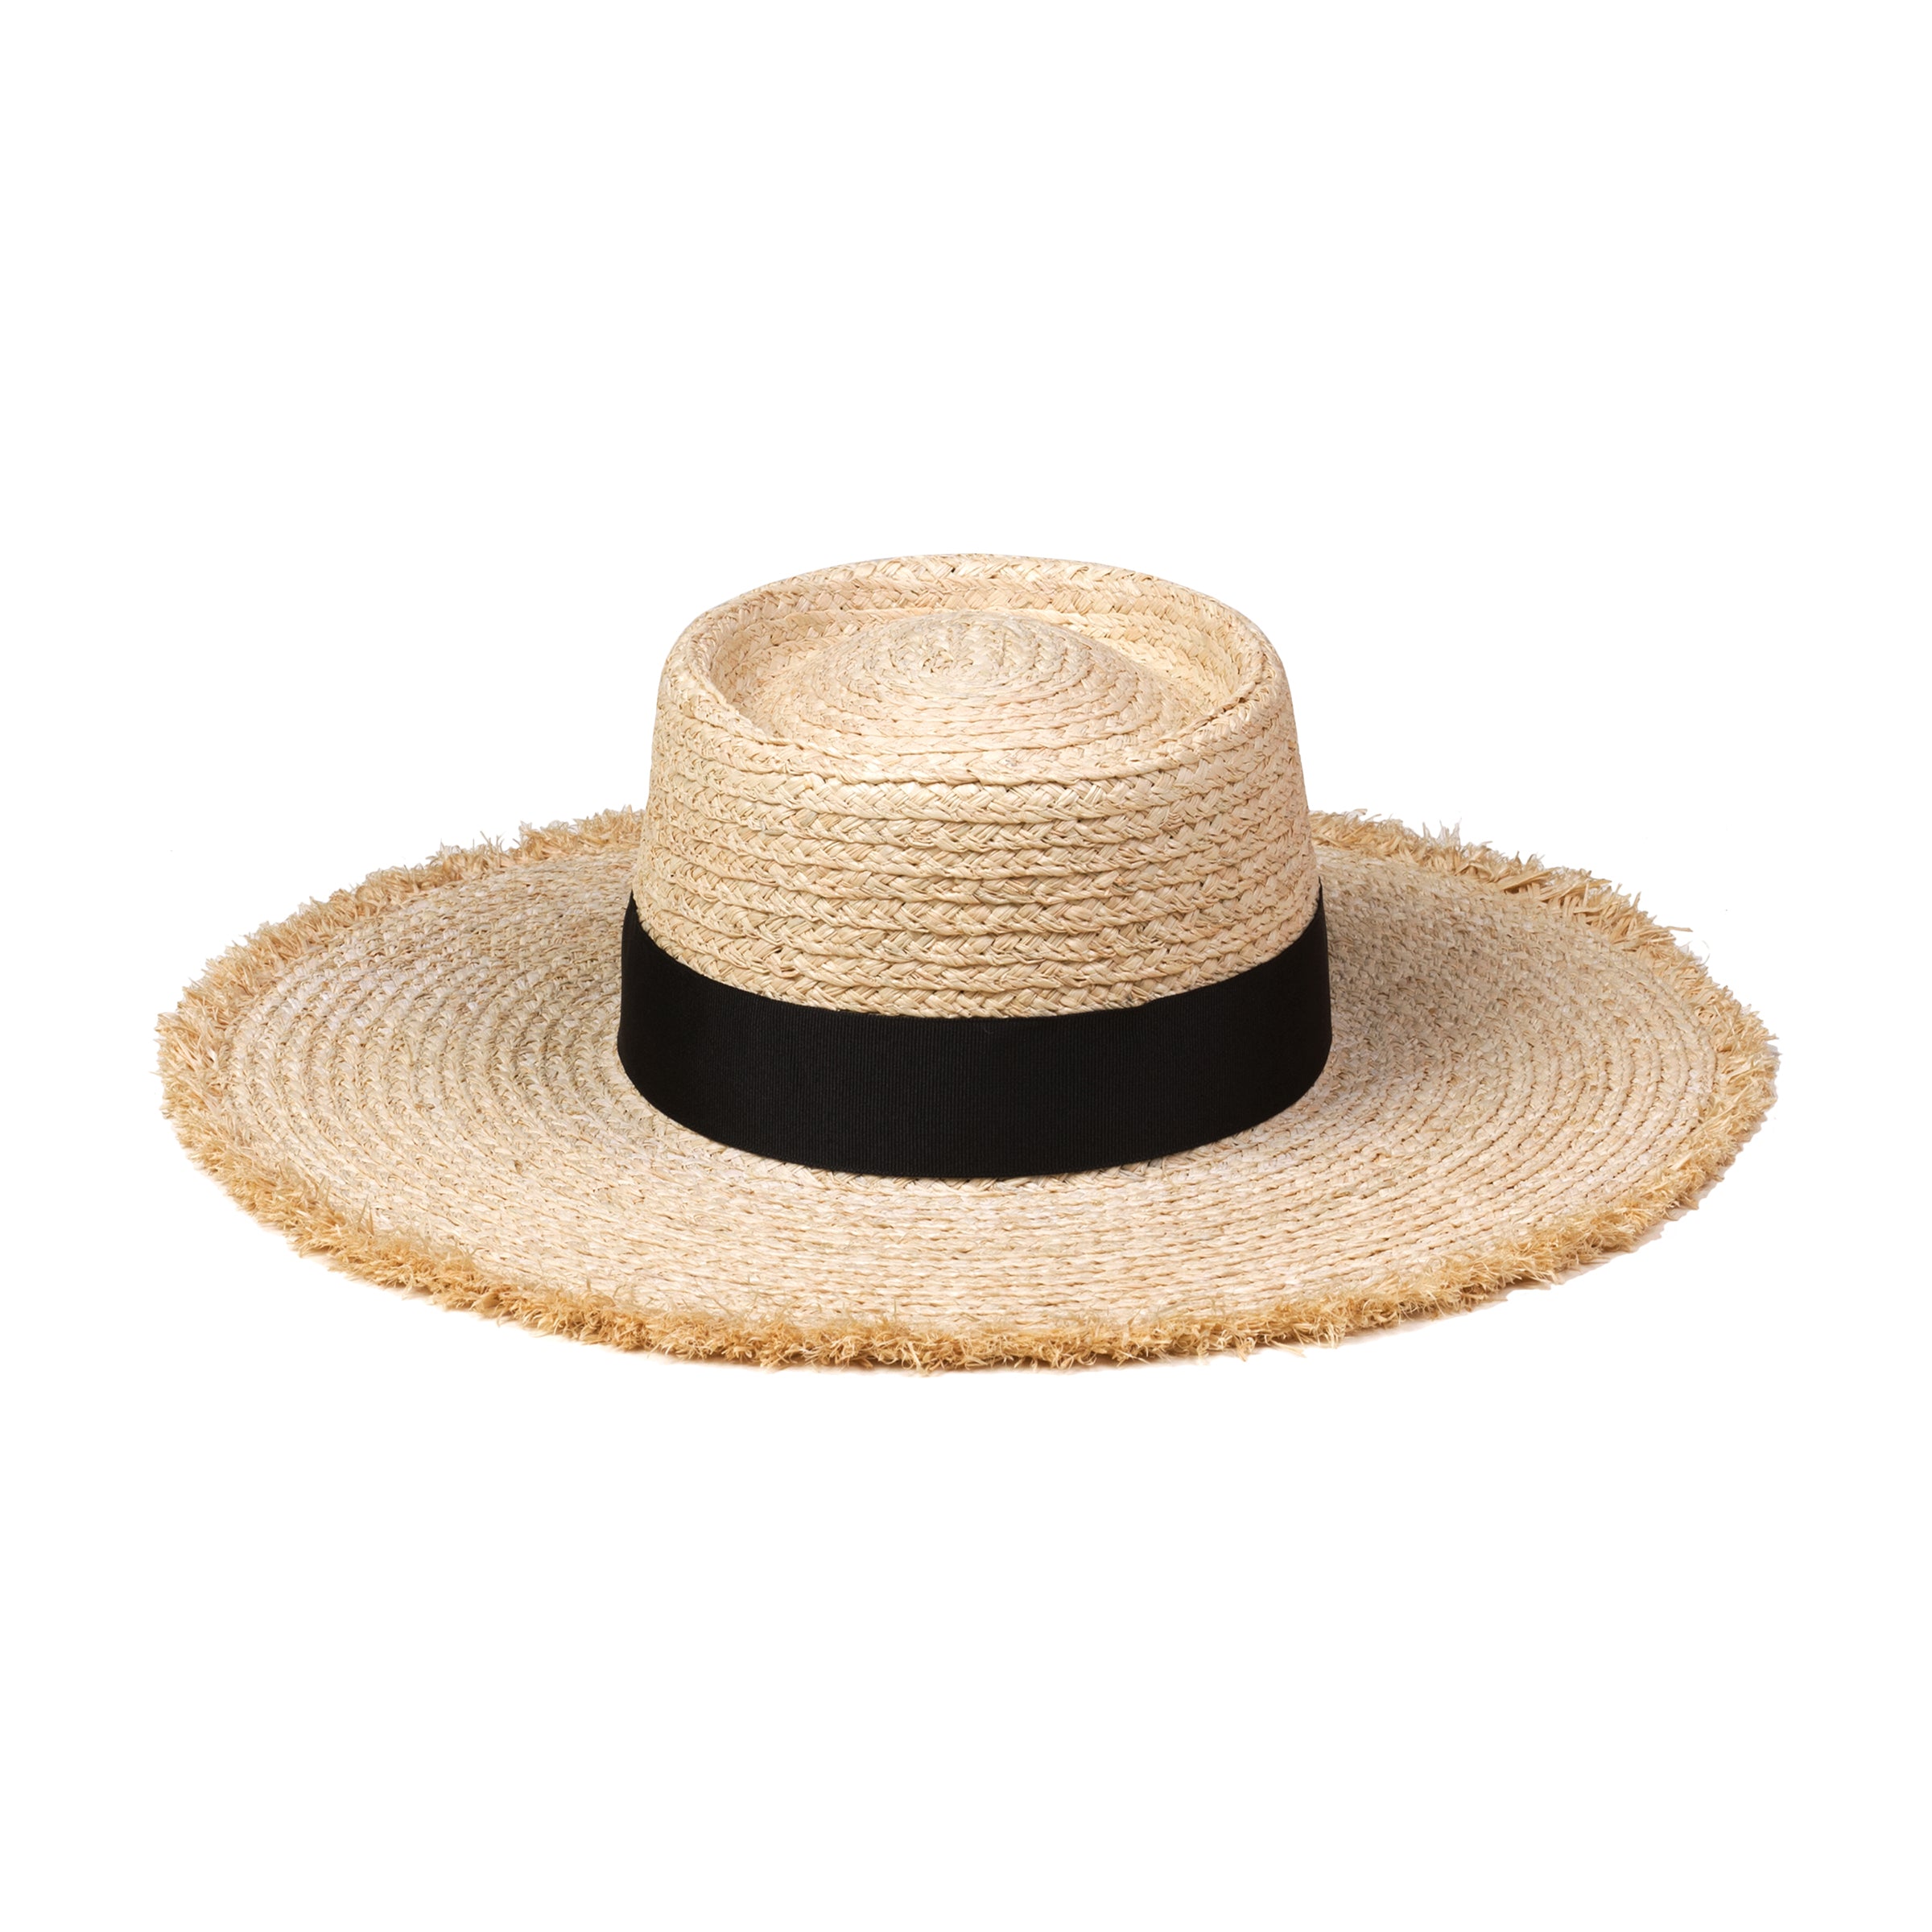 The Ventura - Straw Boater Hat in Natural | Lack of Color US